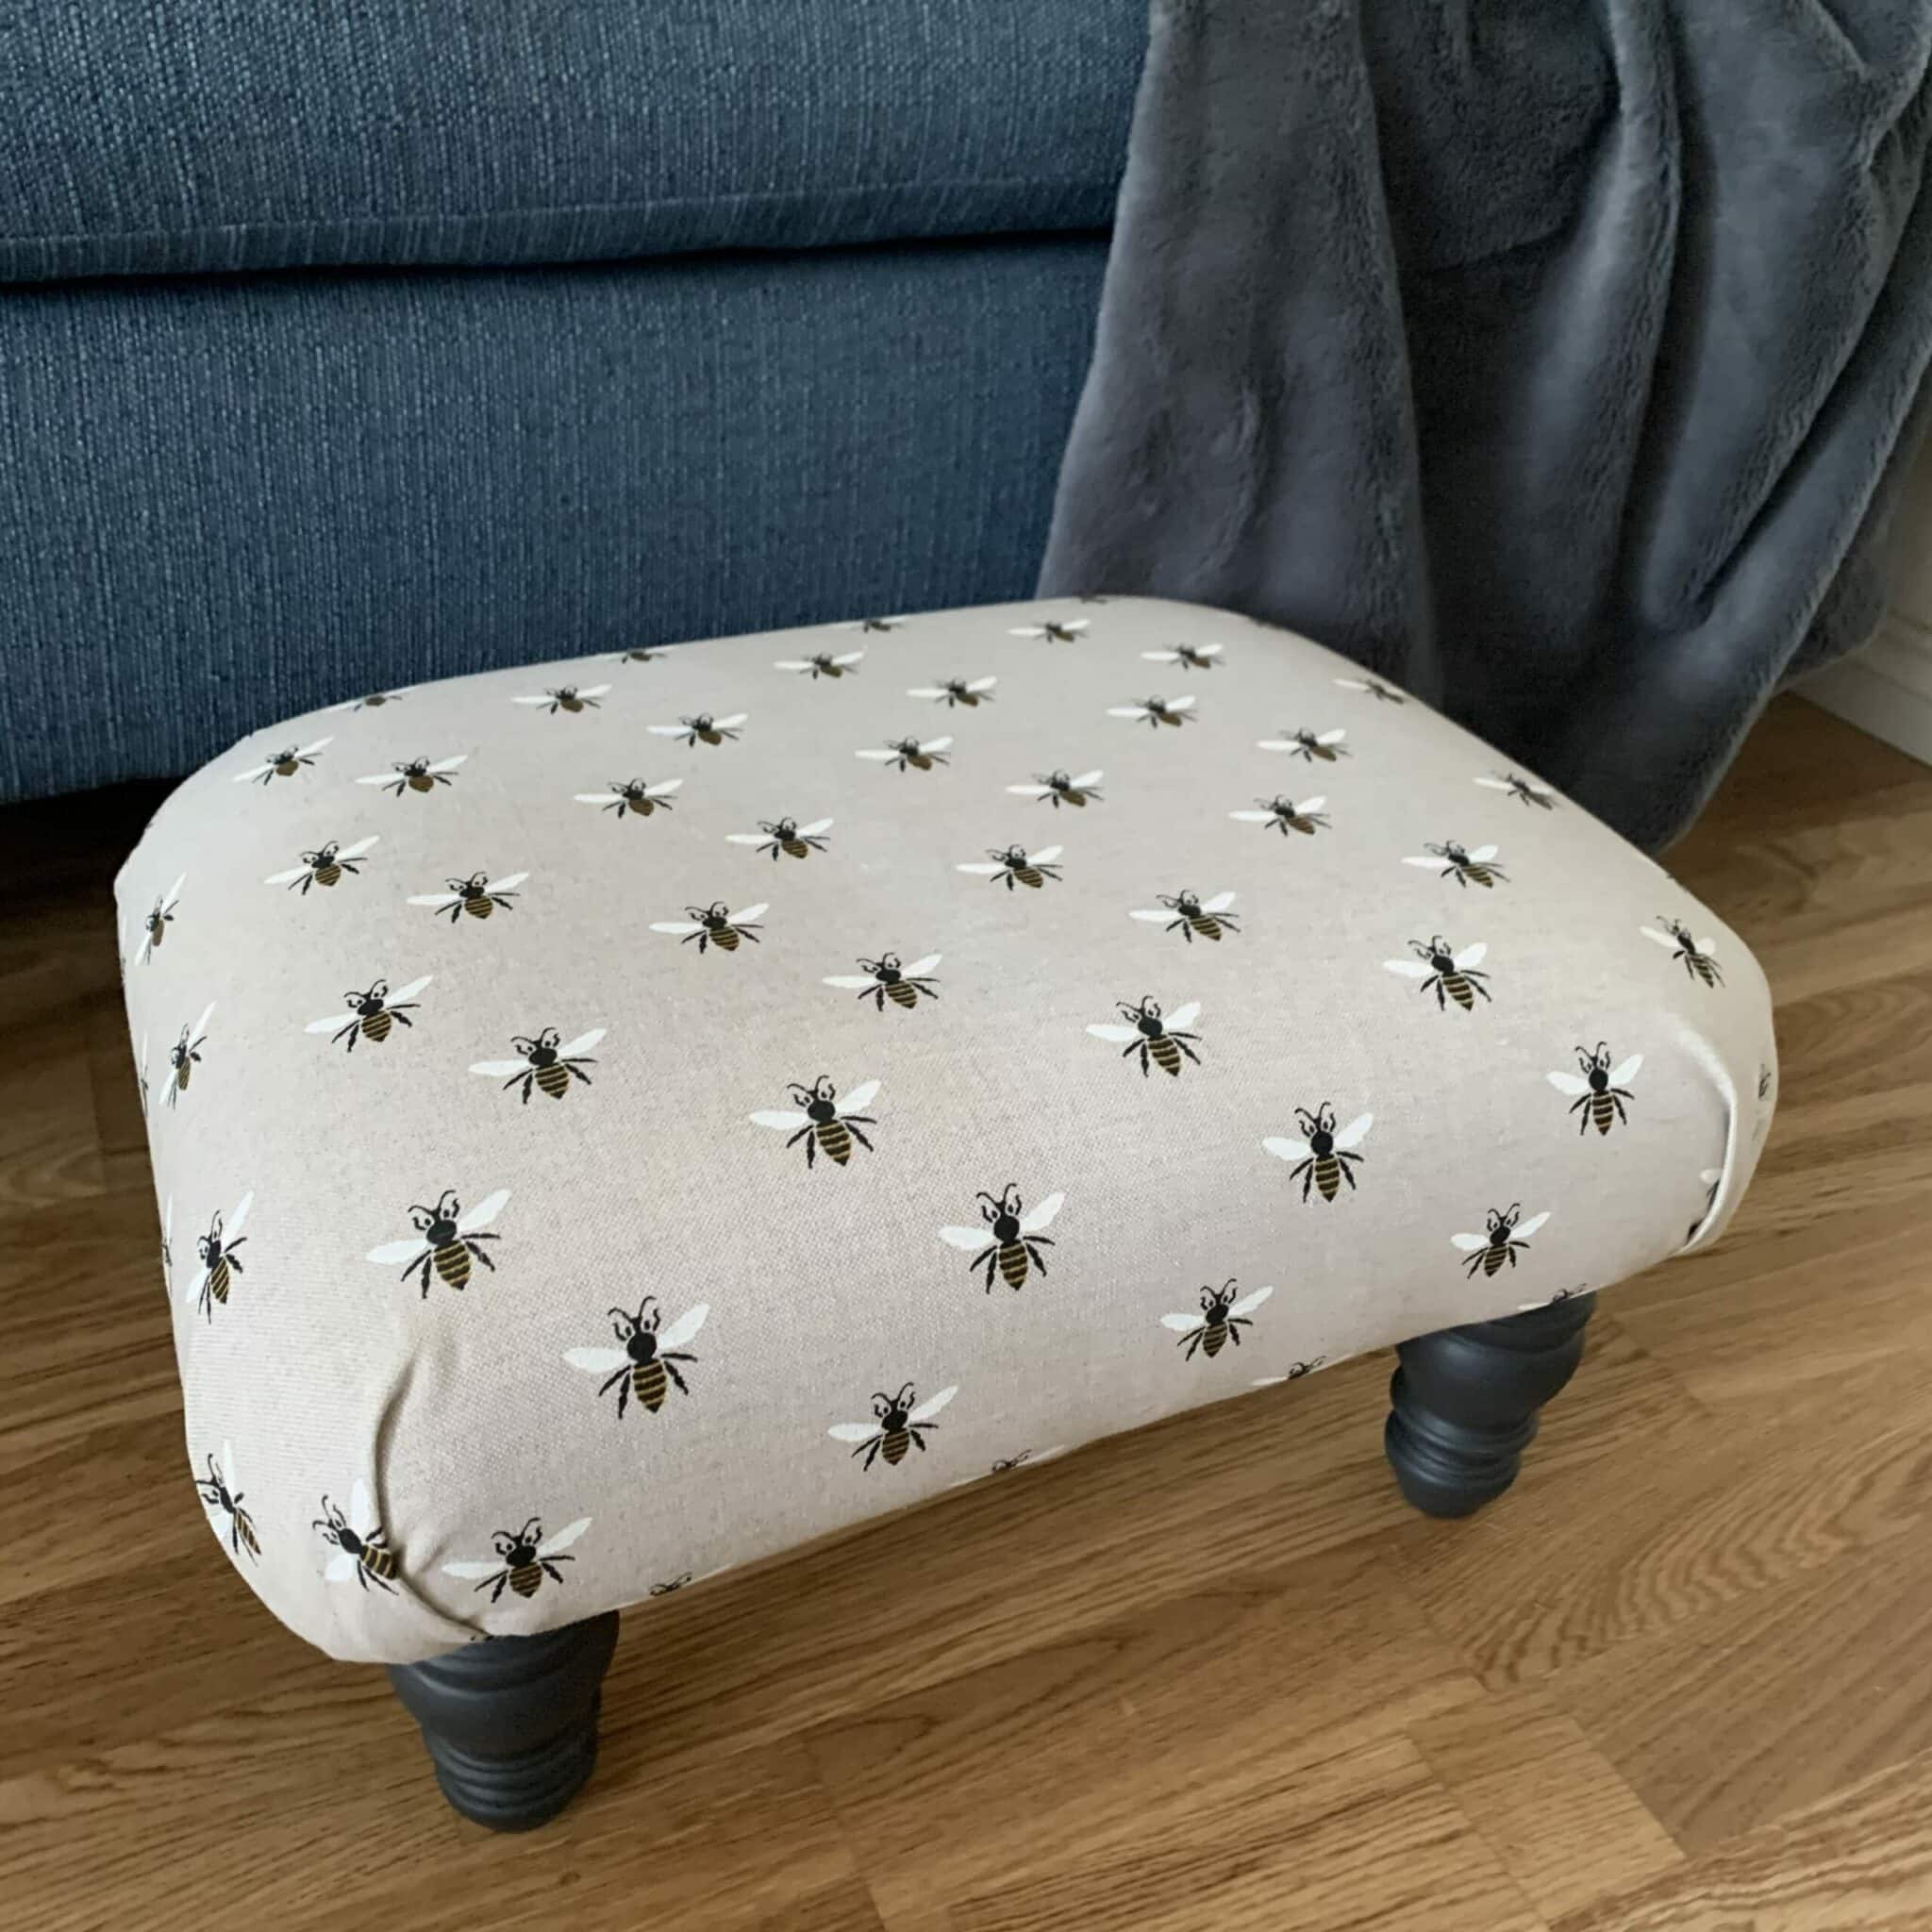 Reupholster a shabby footstool into a beautiful new piece